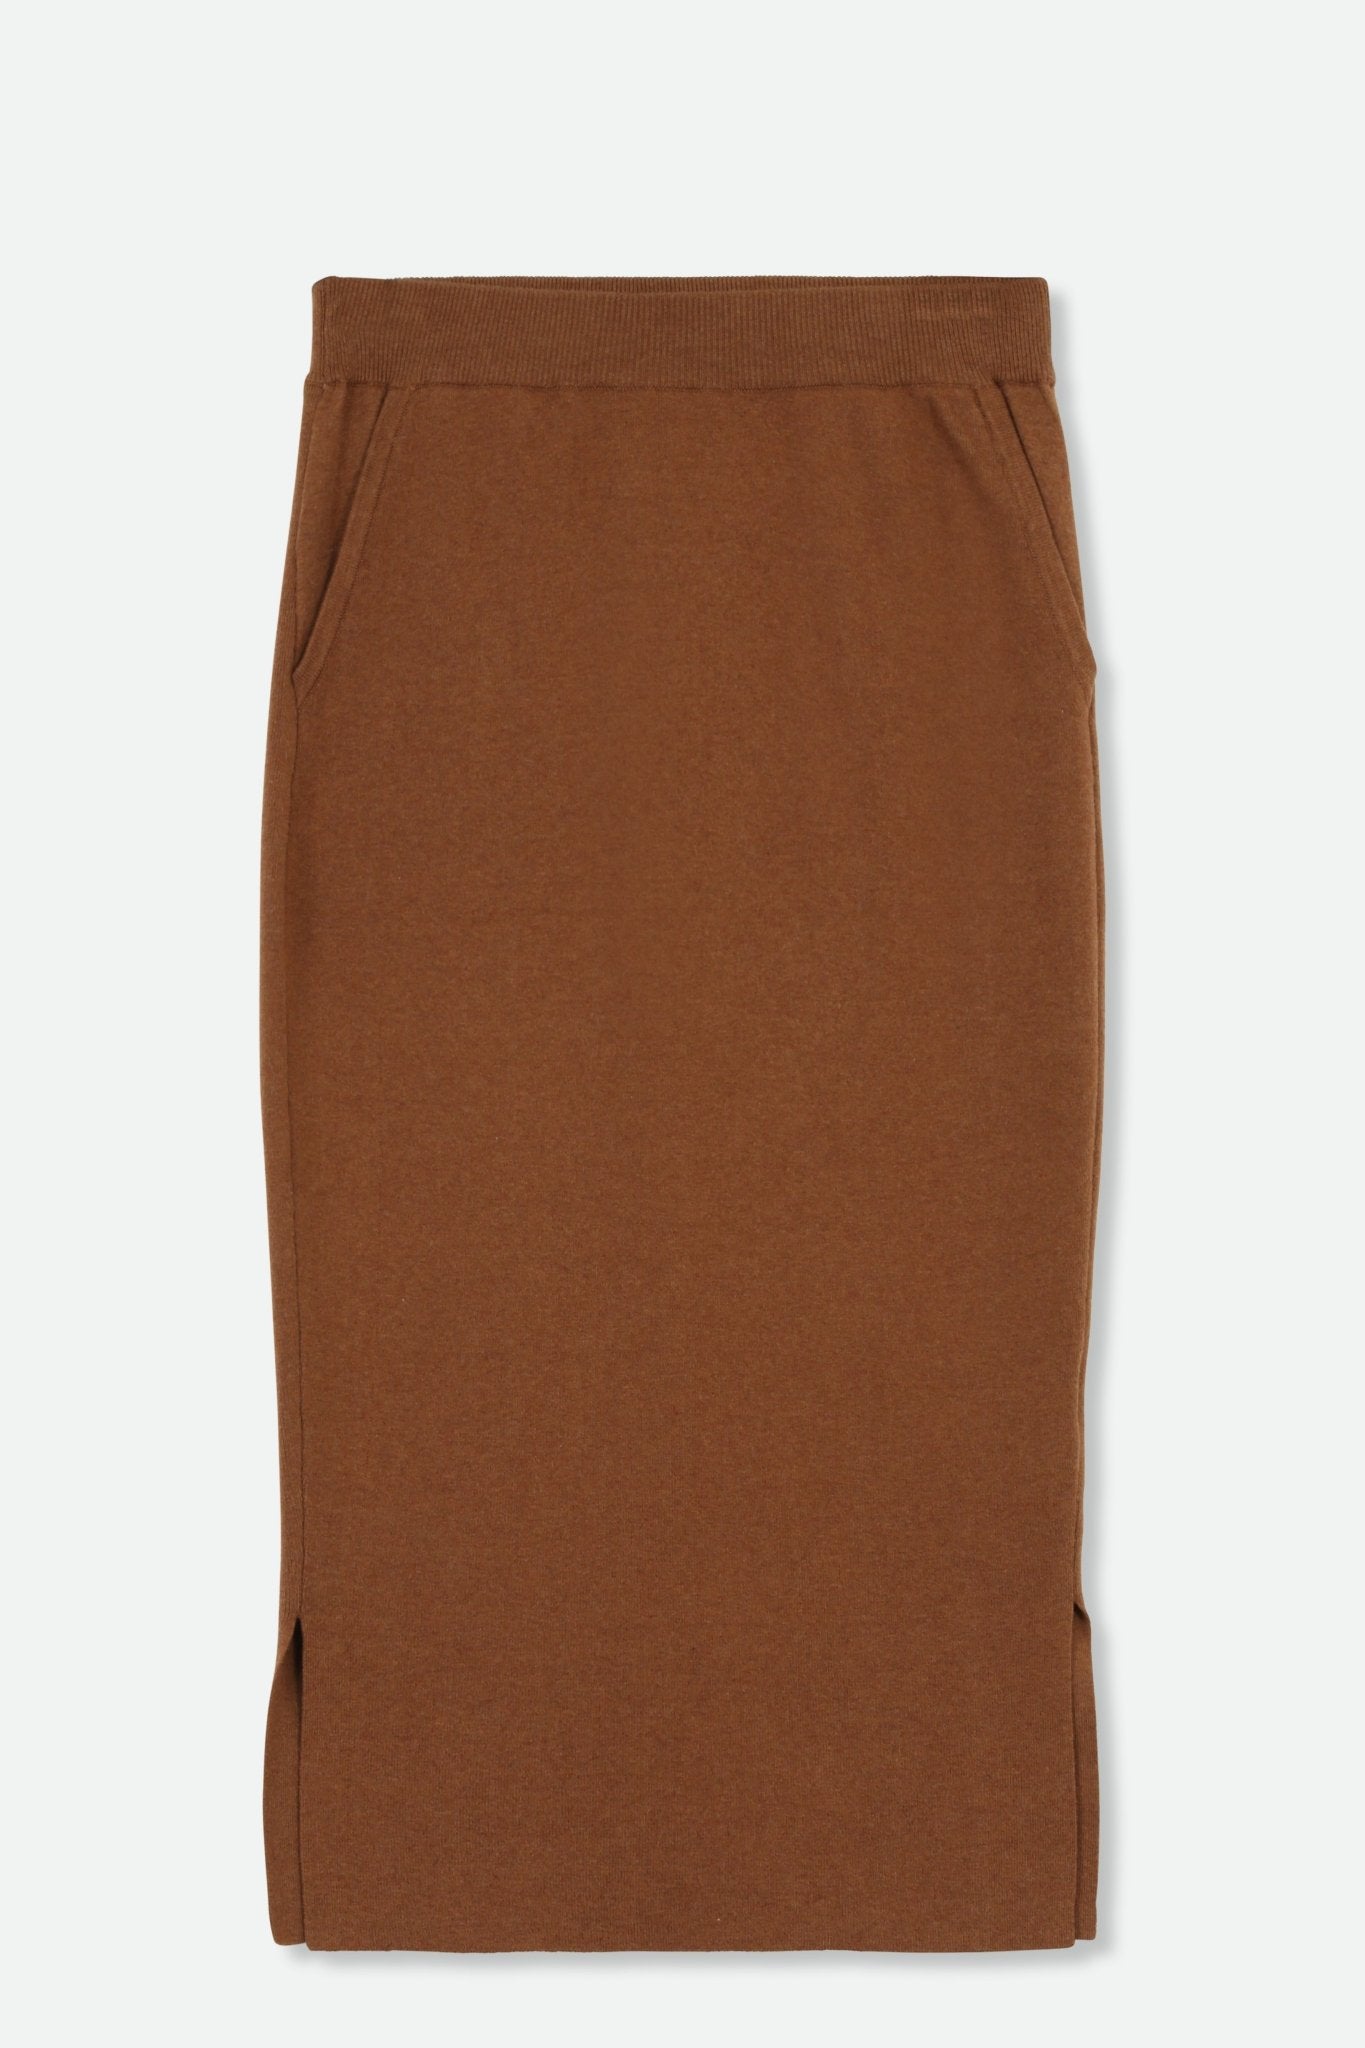 SICILY PENCIL SKIRT IN KNIT PIMA COTTON STRETCH IN SADDLE BROWN - Jarbo